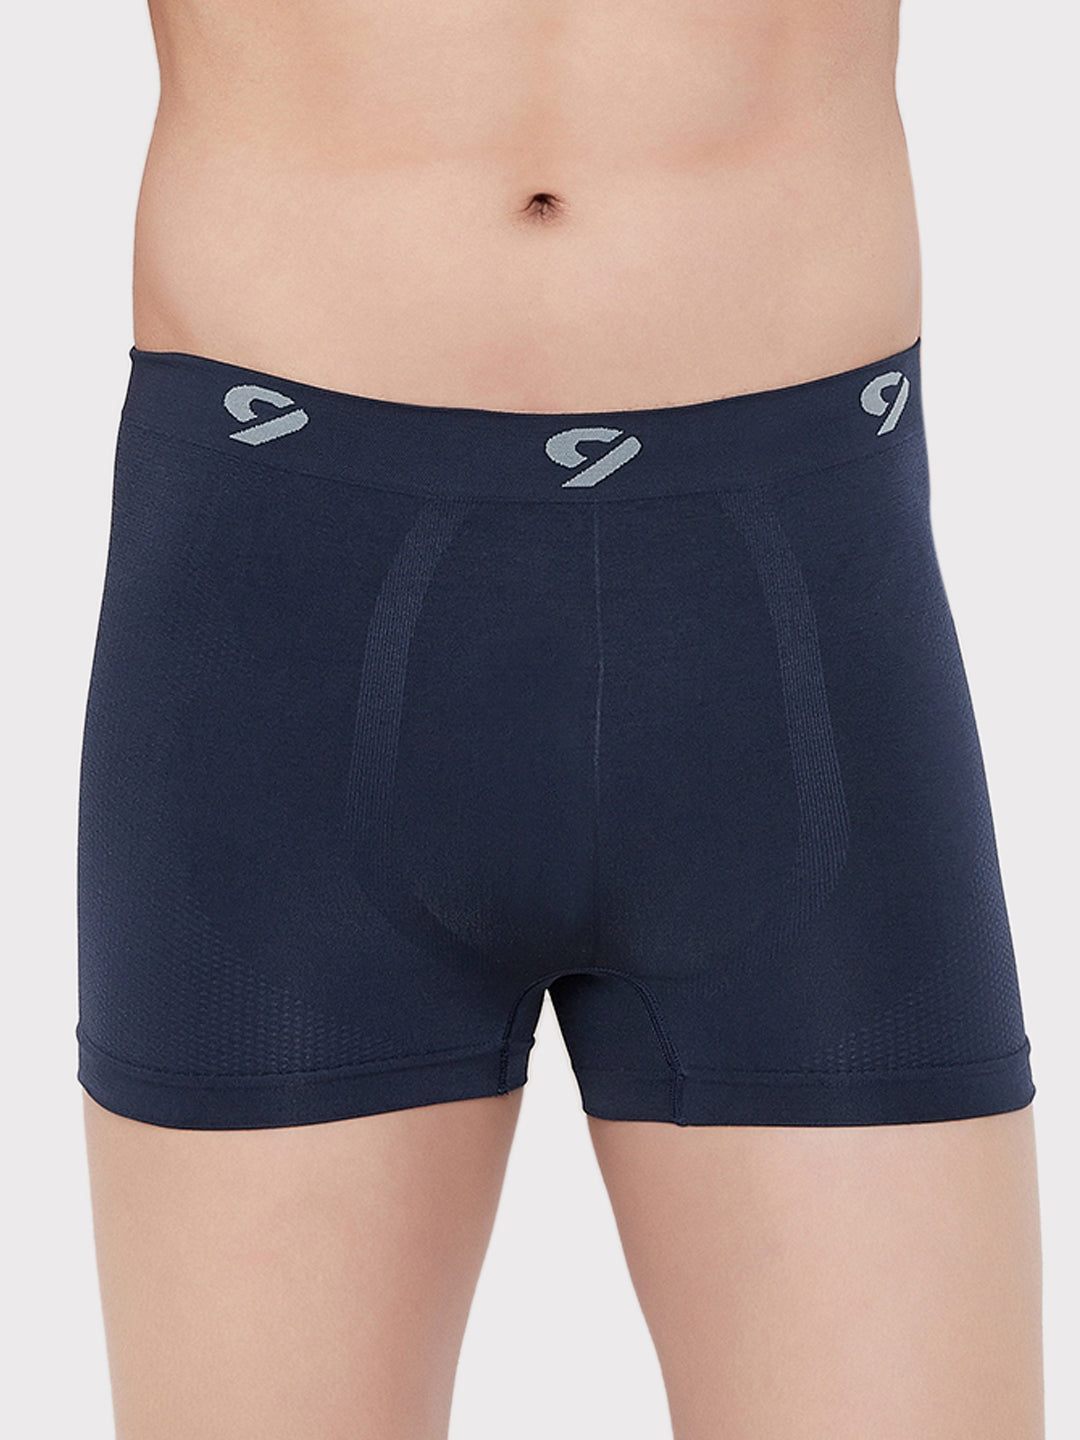 Boxer for Men: Comfort and Style